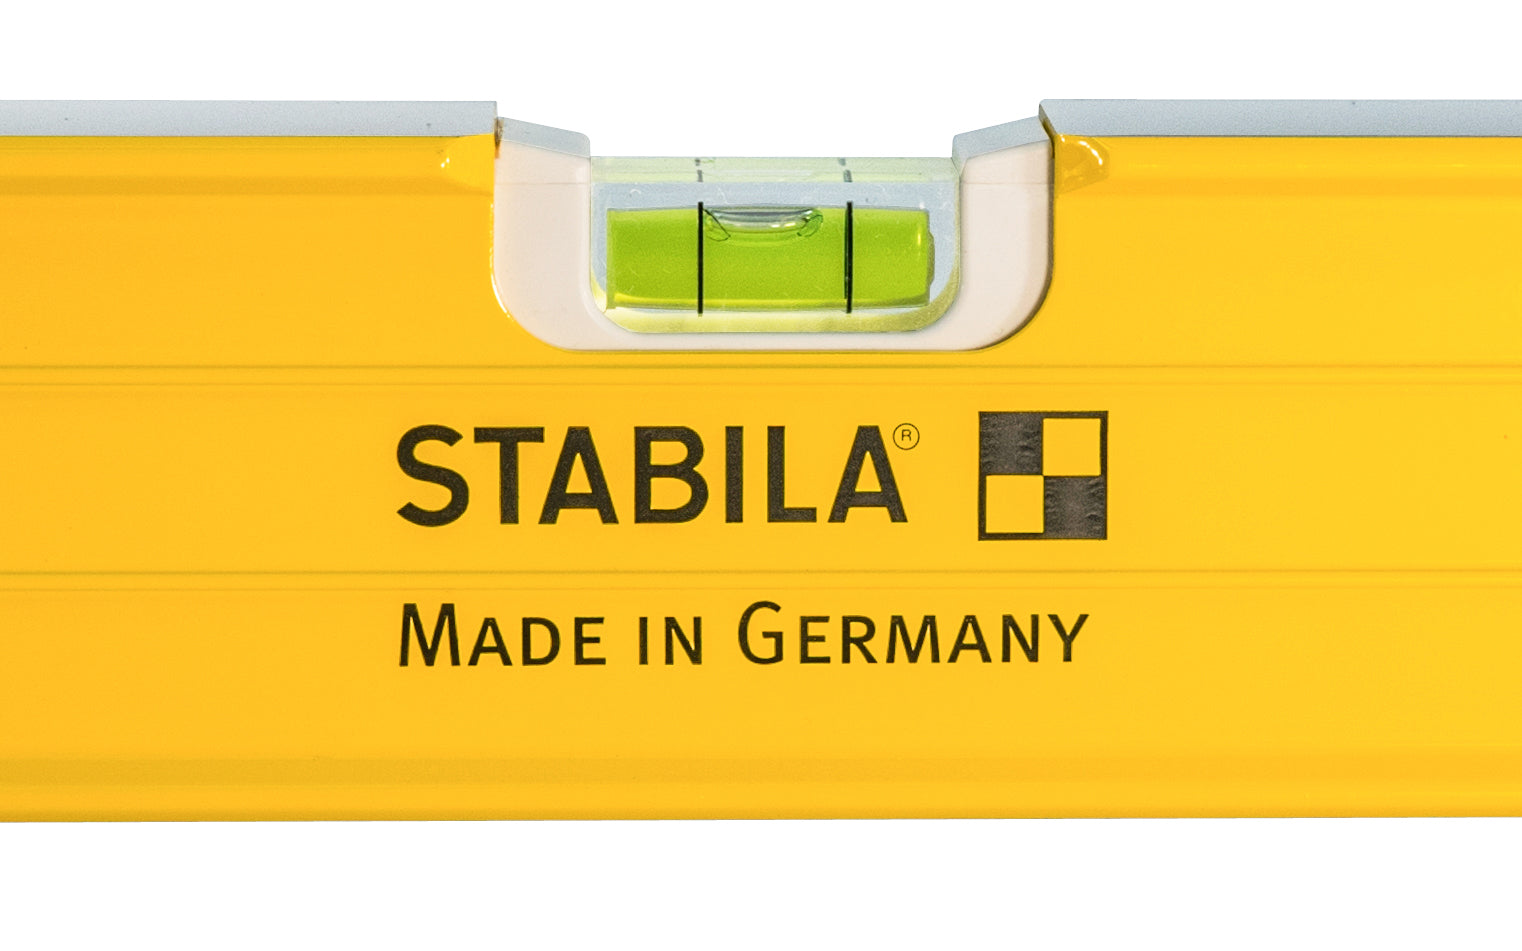 Stabila 32" (81 cm) Heavy Duty Level ~ Type 196-2 - No. 37432 ~ Made in Germany - This level in particularly is useful for building installation & for contractors, since it's 32" size fits door headers, window sills, & thresholds